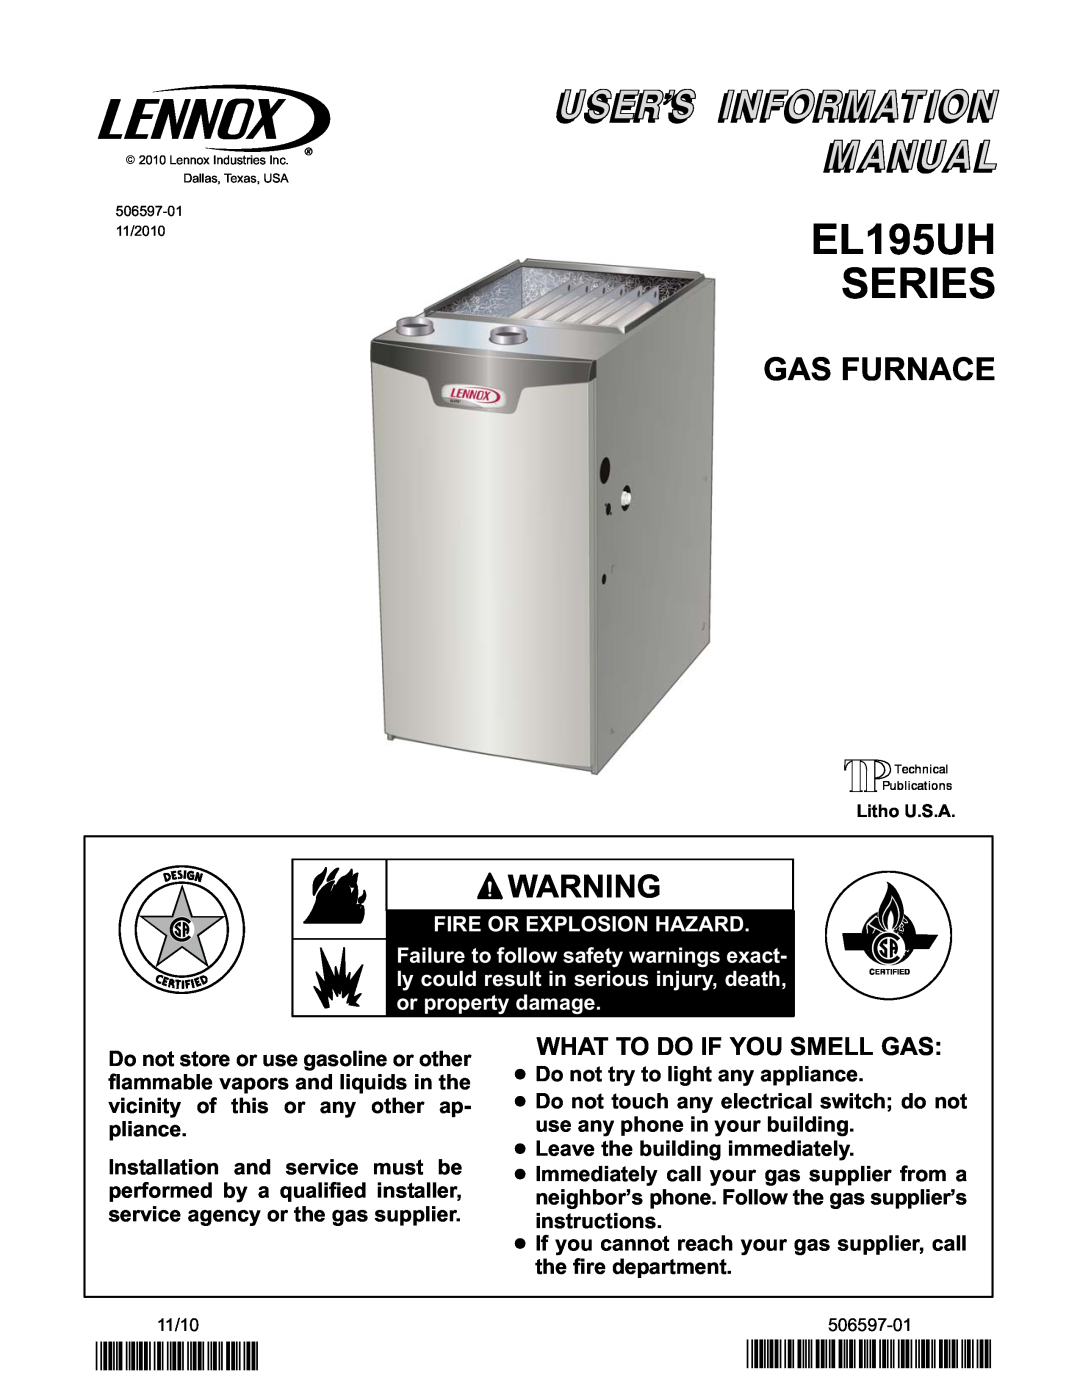 Lenox Gas Furnace manual EL195UH SERIES, 2P1110, P506597-01, What To Do If You Smell Gas, Fire Or Explosion Hazard 